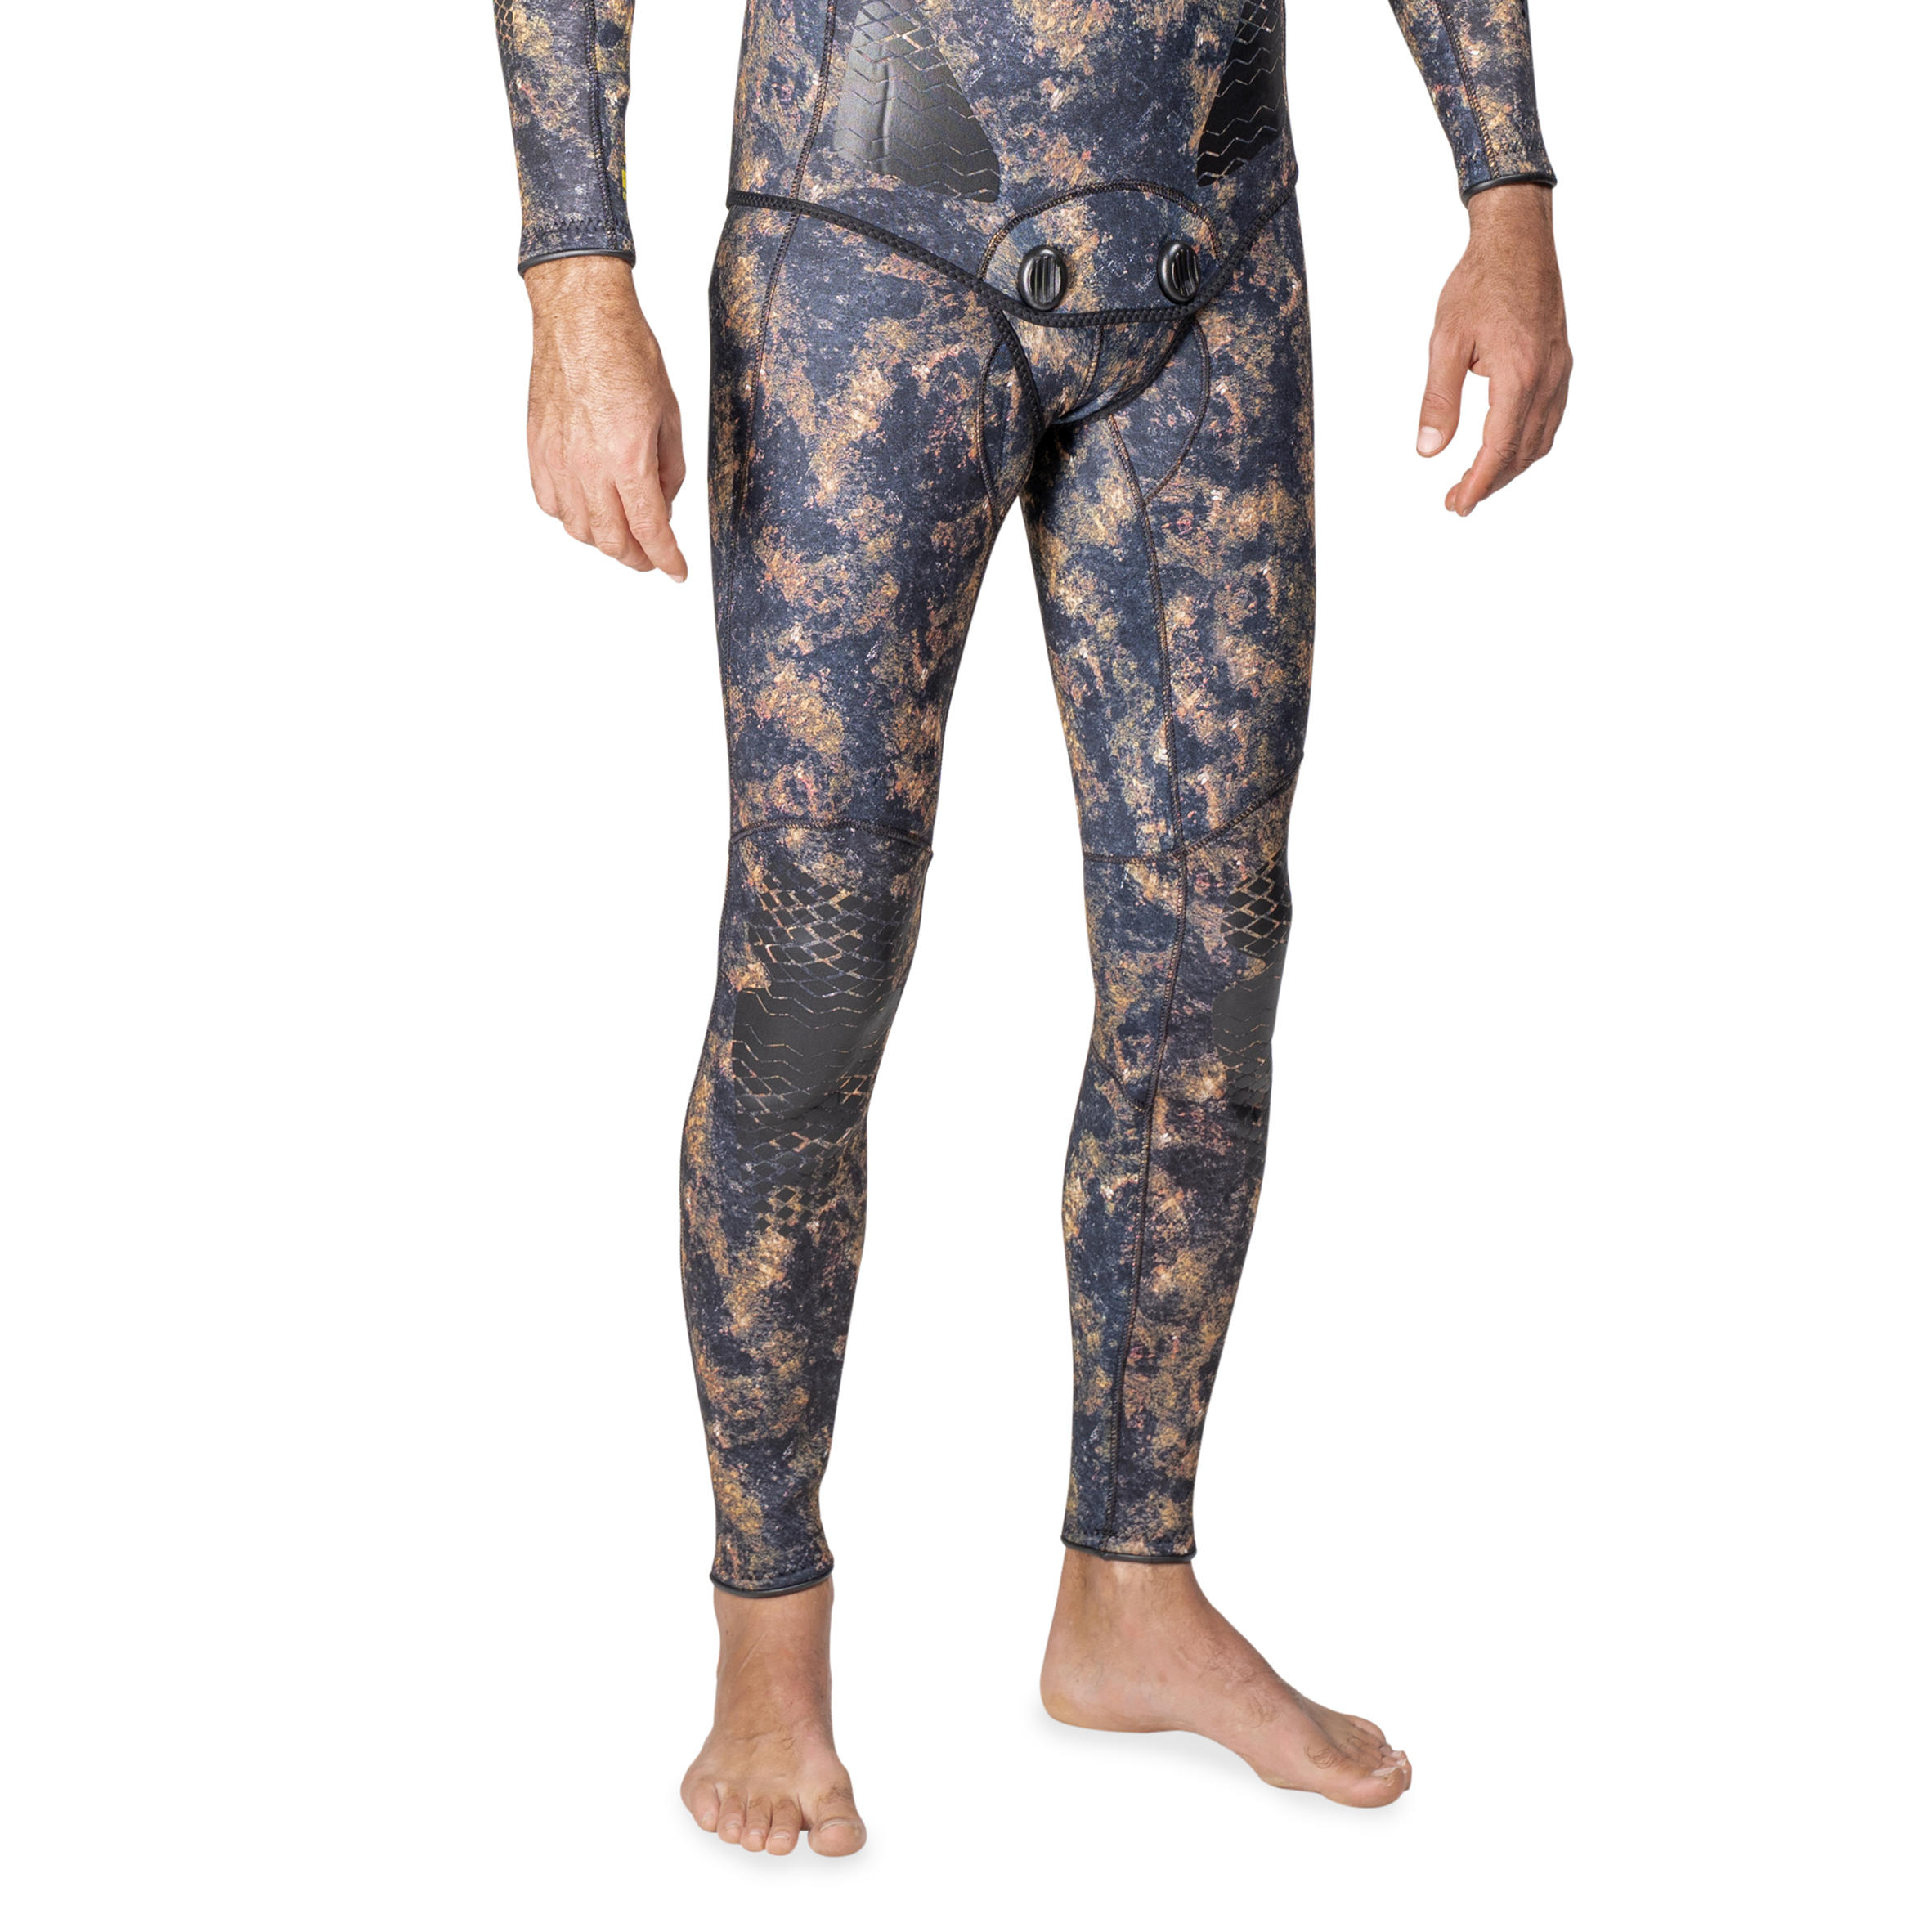 3mm split neoprene camouflage trousers for free-diving spearfishing 3/6